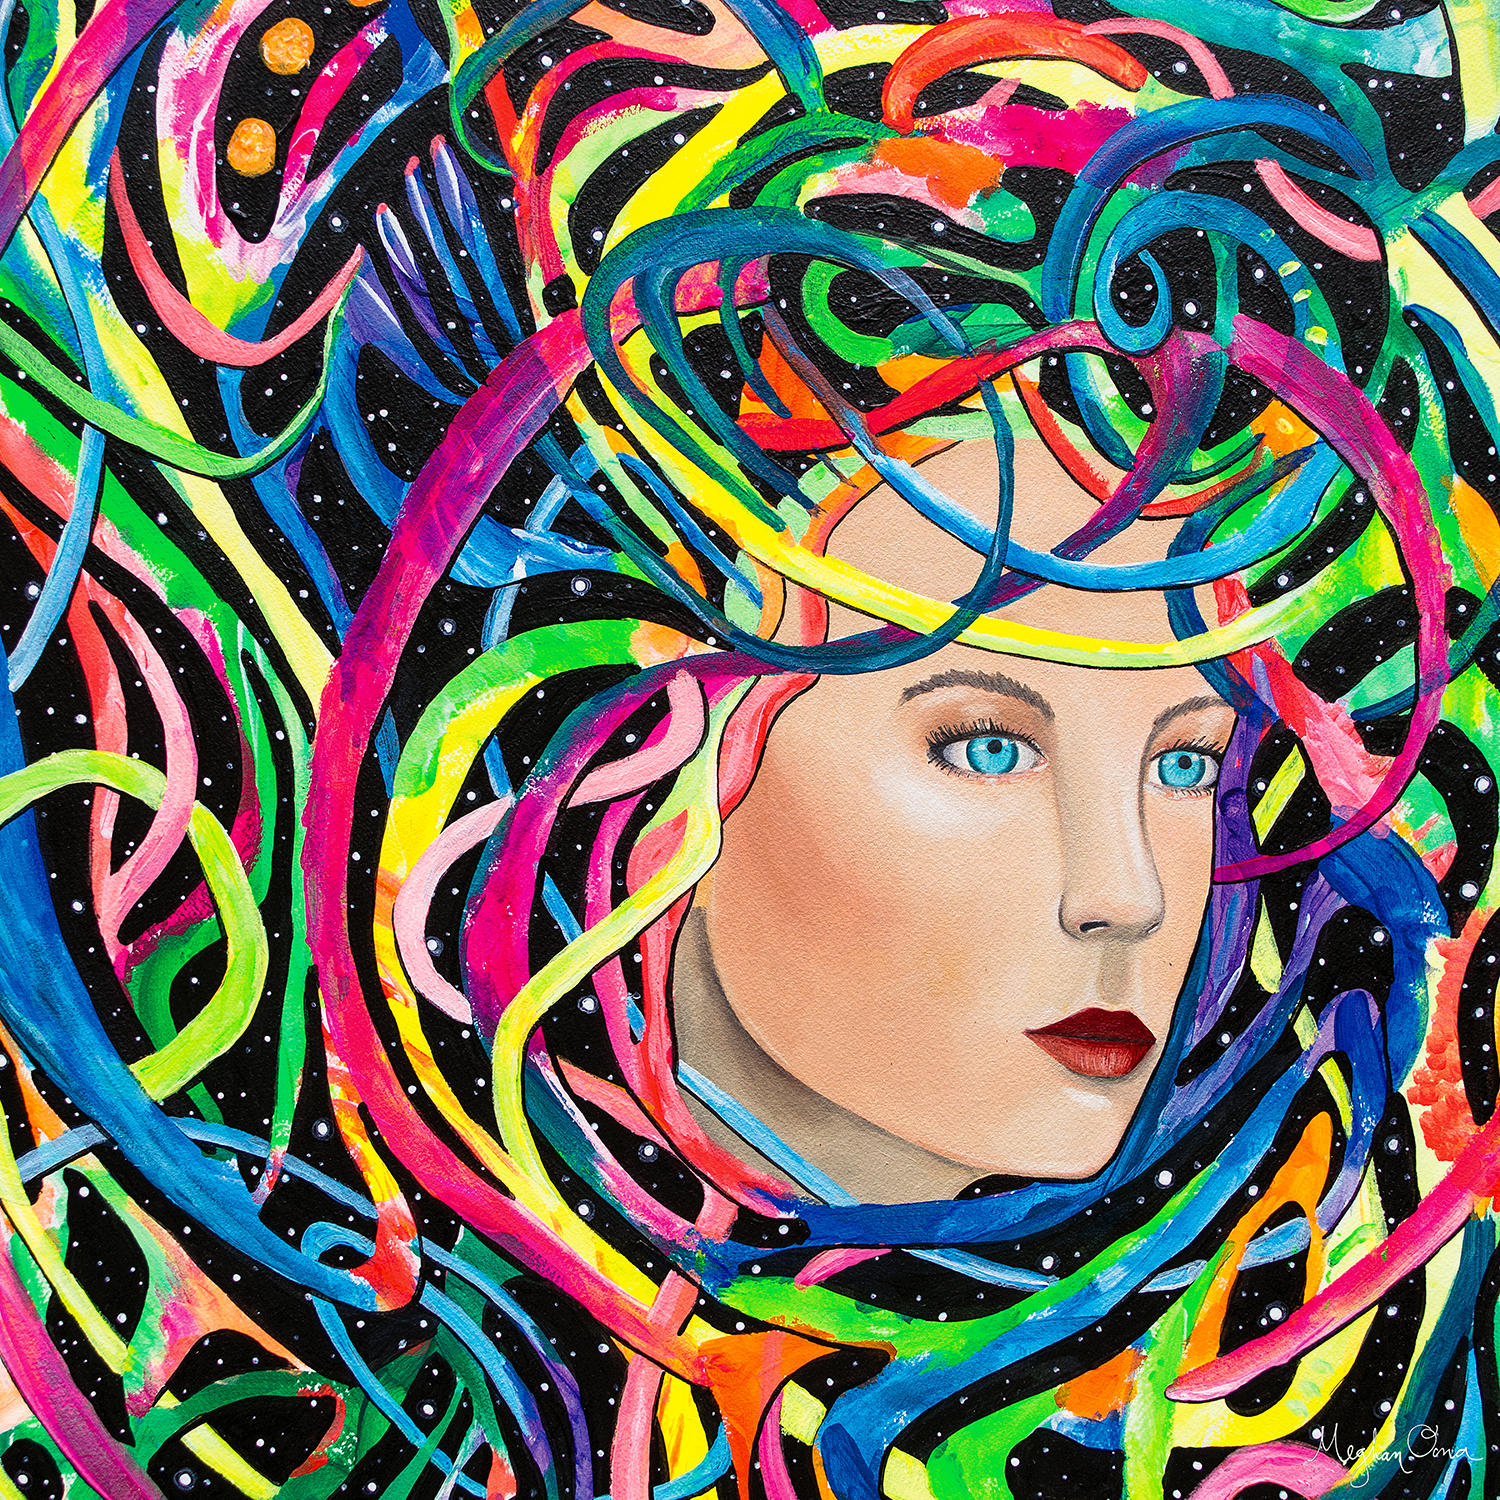 woman's face appearing from a web of colorful lines with night sky and stars in background